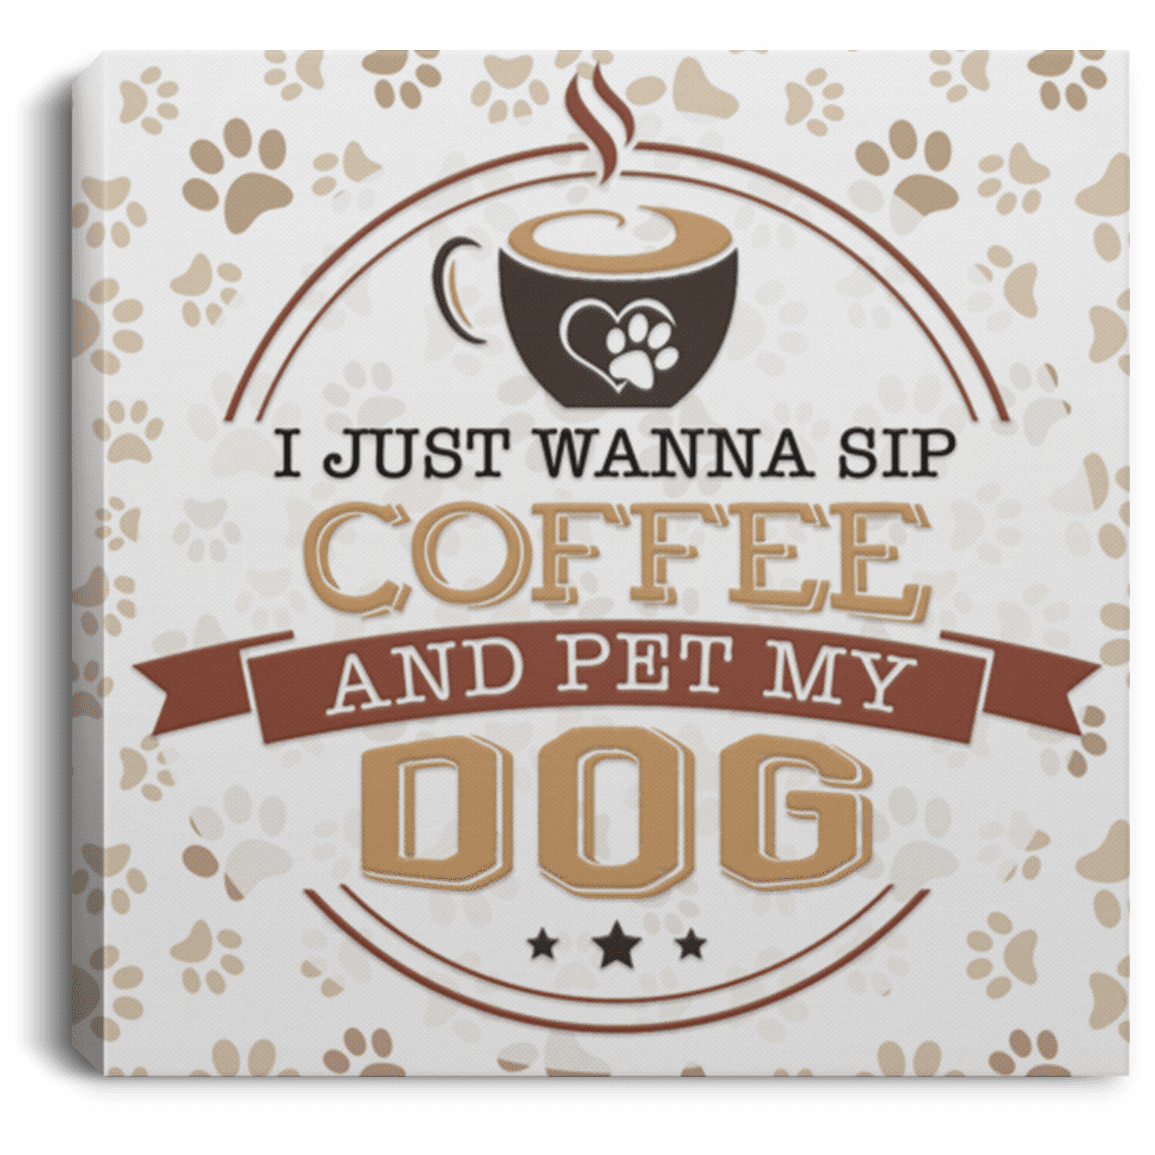 Sip Coffee and Pet My Dog - Wall Canvas.